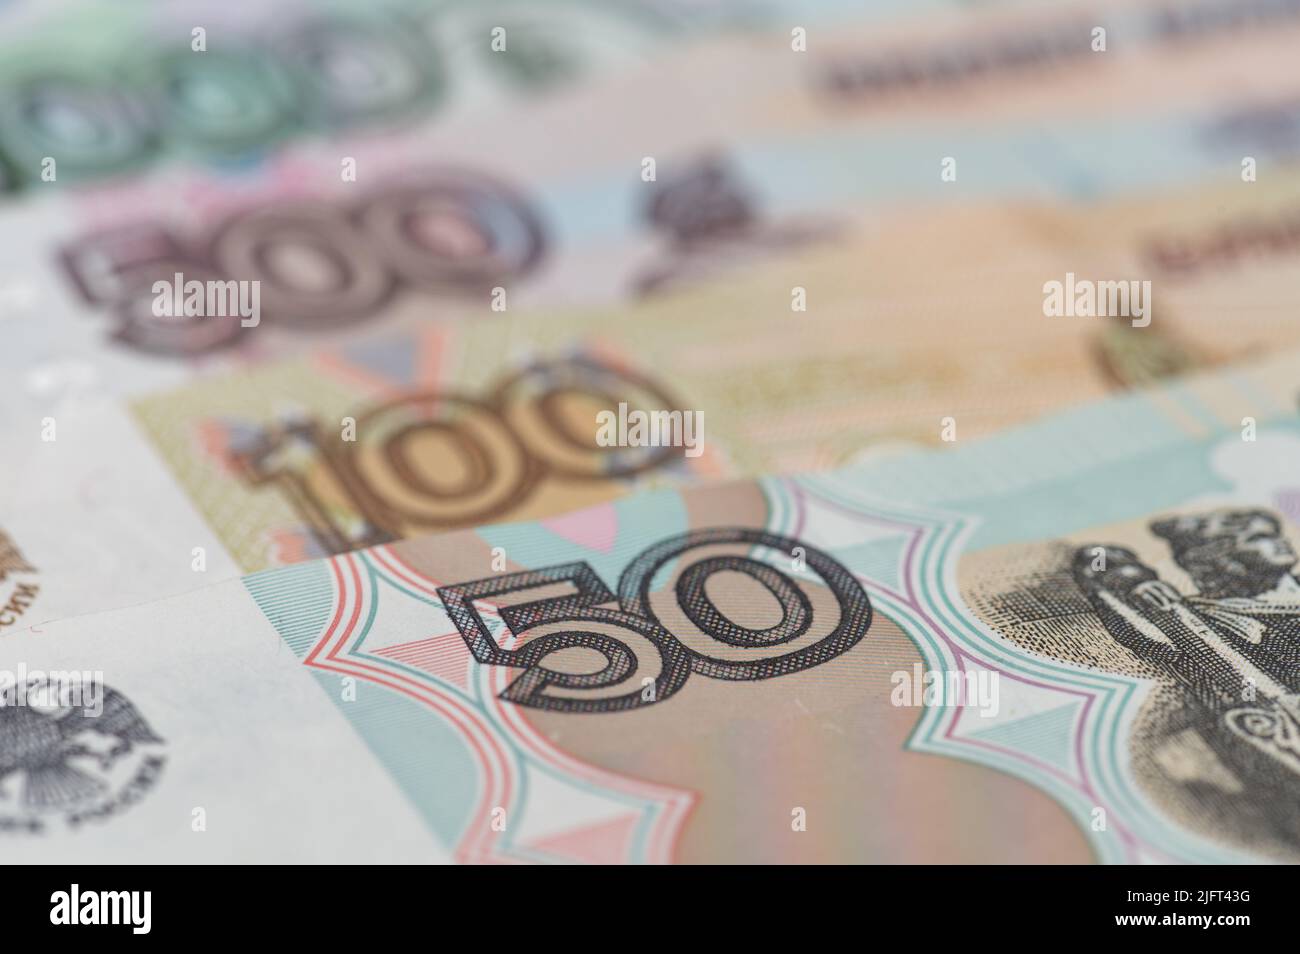 Russian rubles background. Money background and texture. Banknotes of different denominations Stock Photo